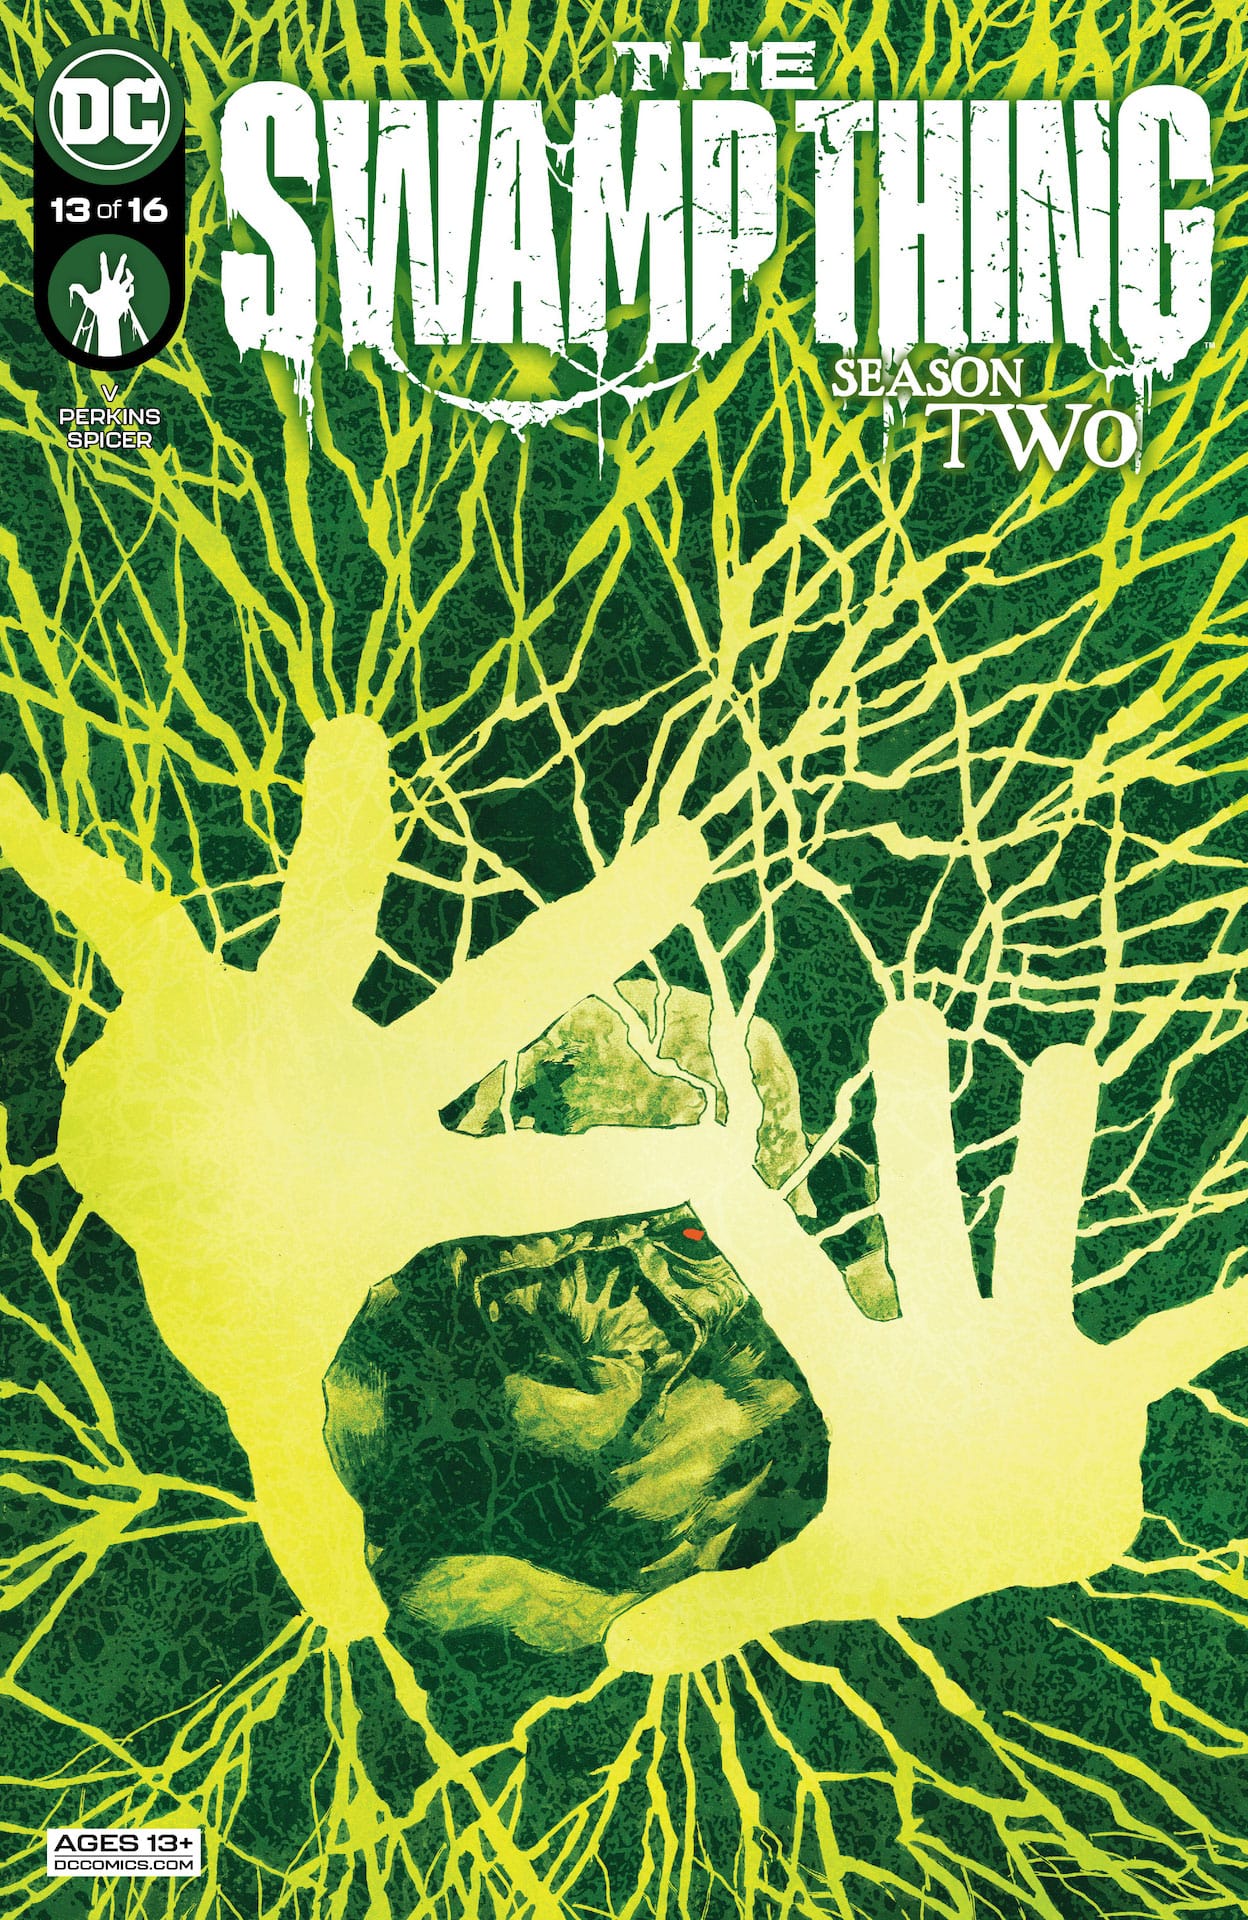 DC Preview: The Swamp Thing #13